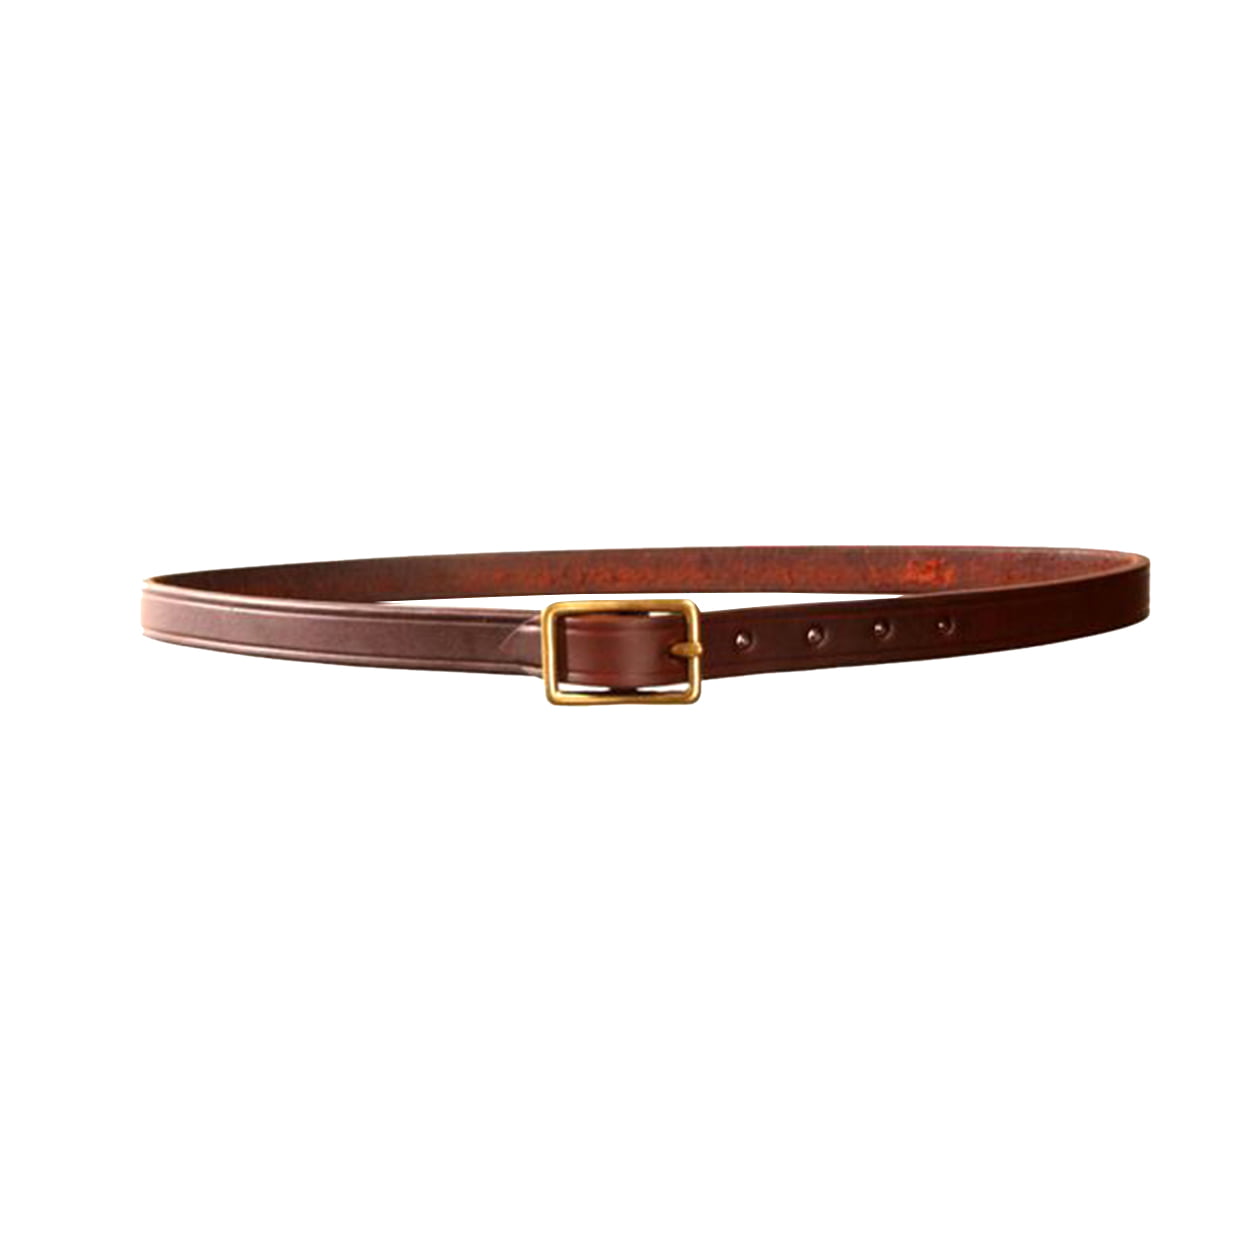 Kincade Leather Saddlery Neck Strap Brown All Sizes 